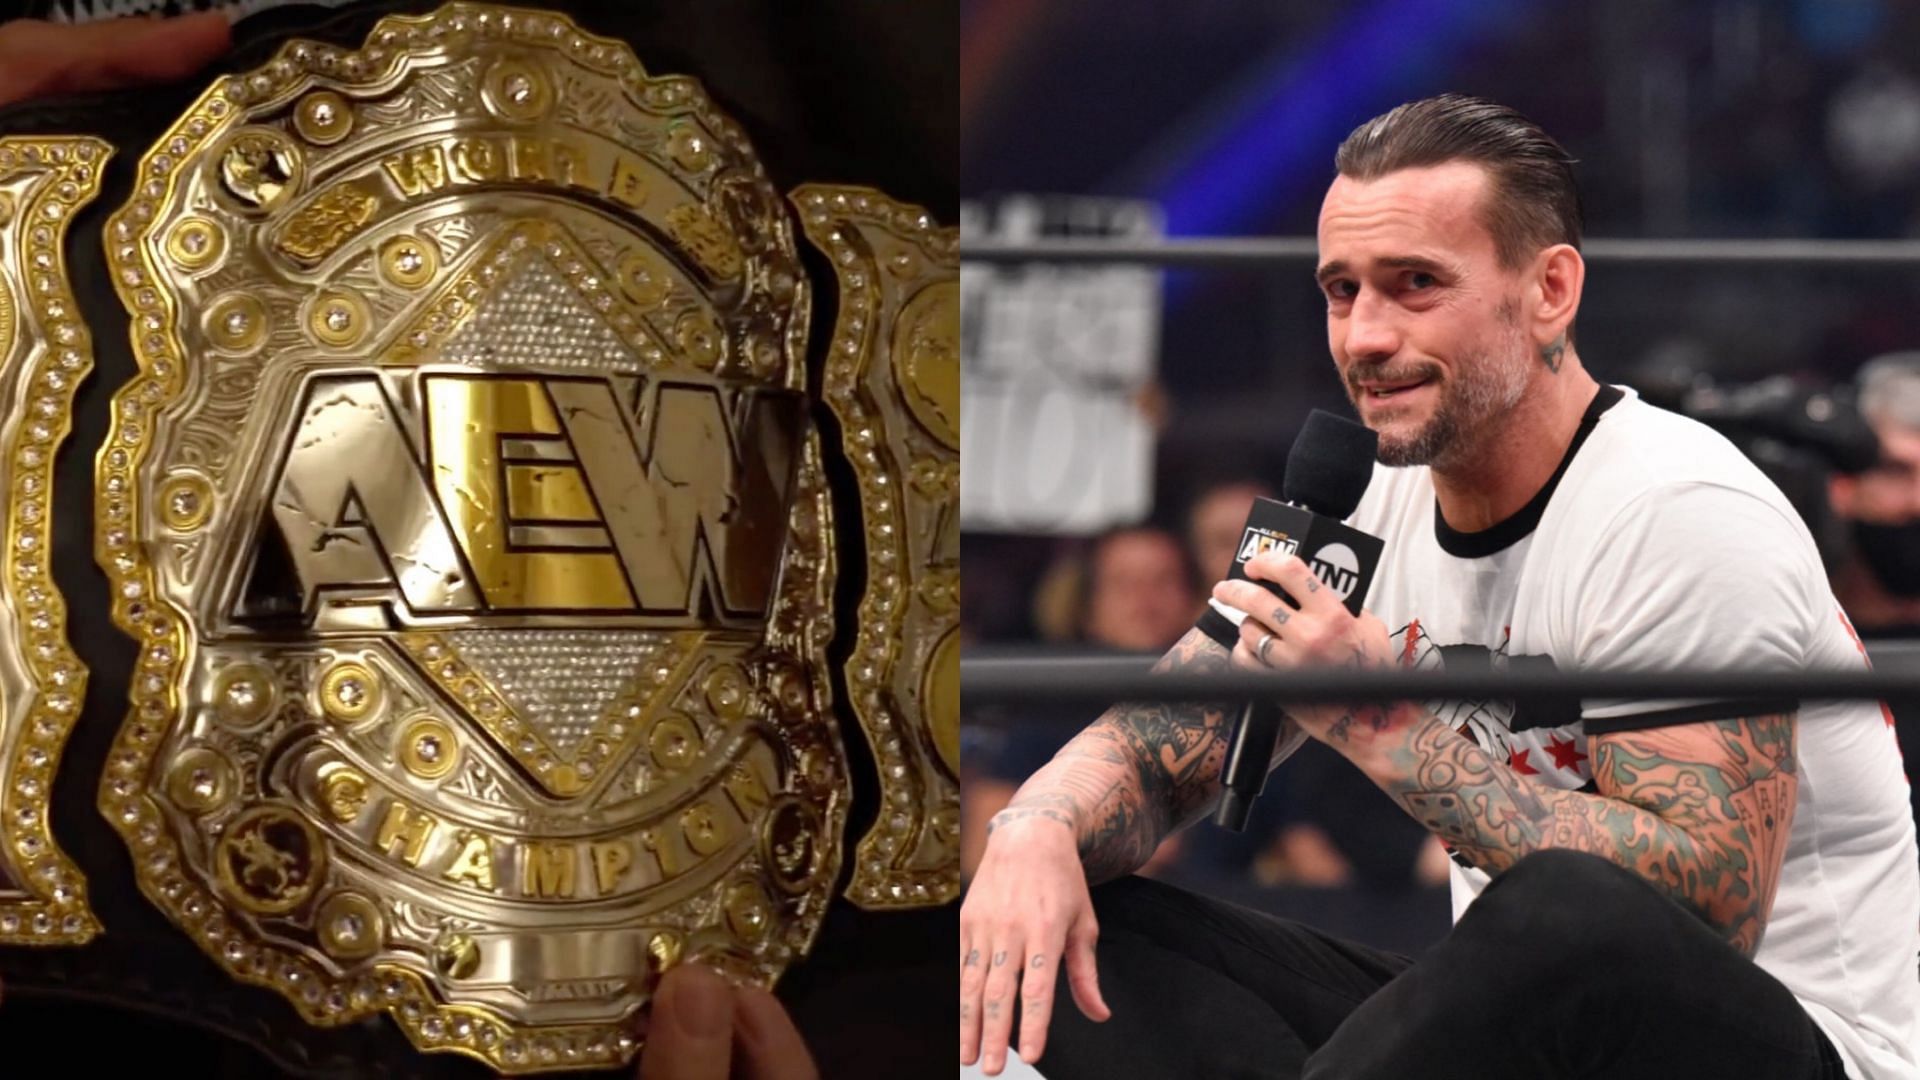 AEW star CM Punk to face Bobby Fish in Dynamite